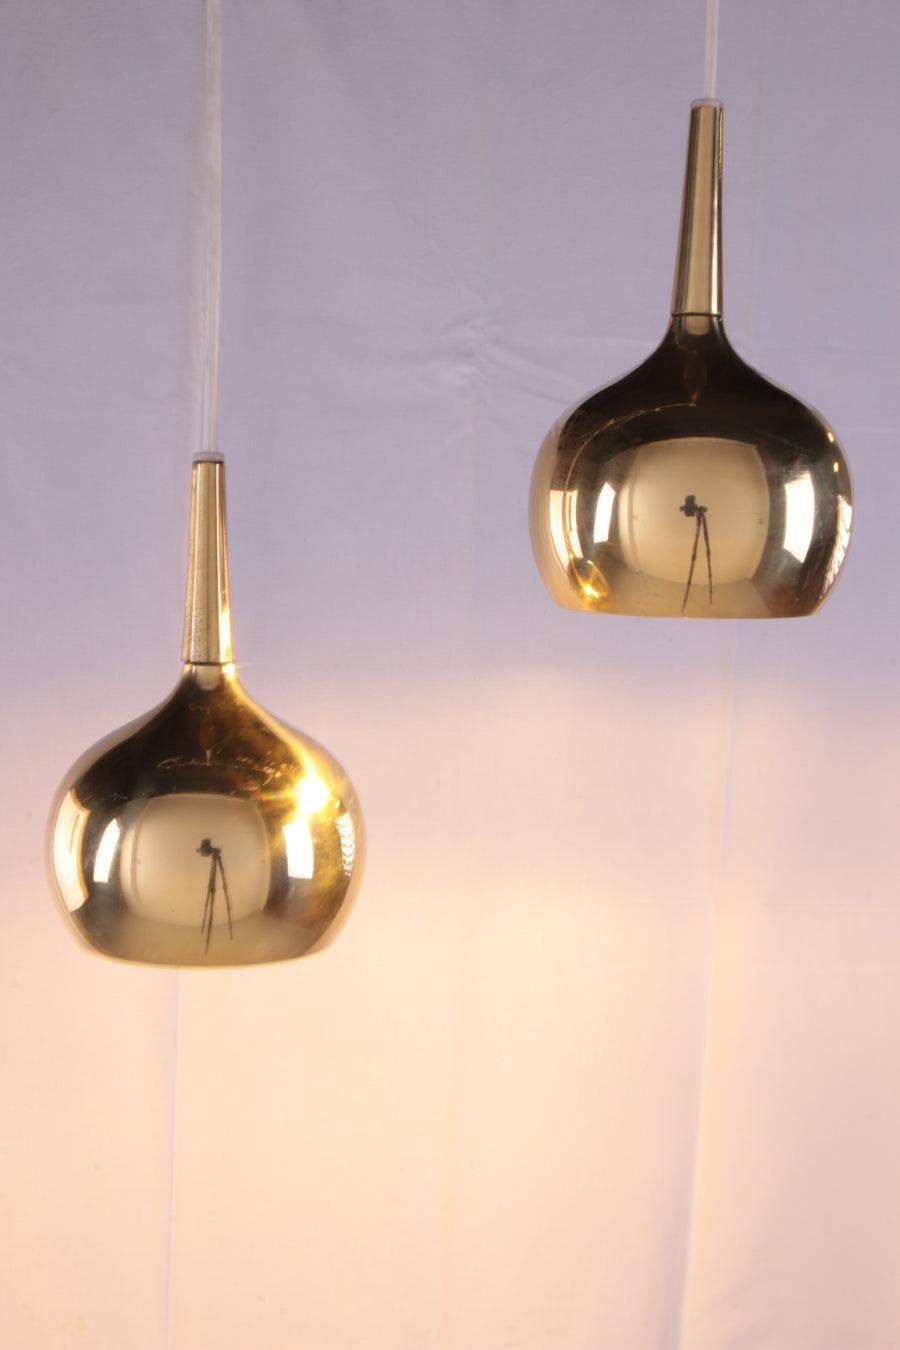 Pair of Pendant Lamps by Hans-agne Jakobsson for Markaryd AB, 60s

Hanging lamp set by Hans-Agne Jakobsson for Markaryd AB, 60s

A brass hanging lamp set by the famous Swedish designer Hans-Agne Jakobsson for the lamp brand Markaryd AB in the